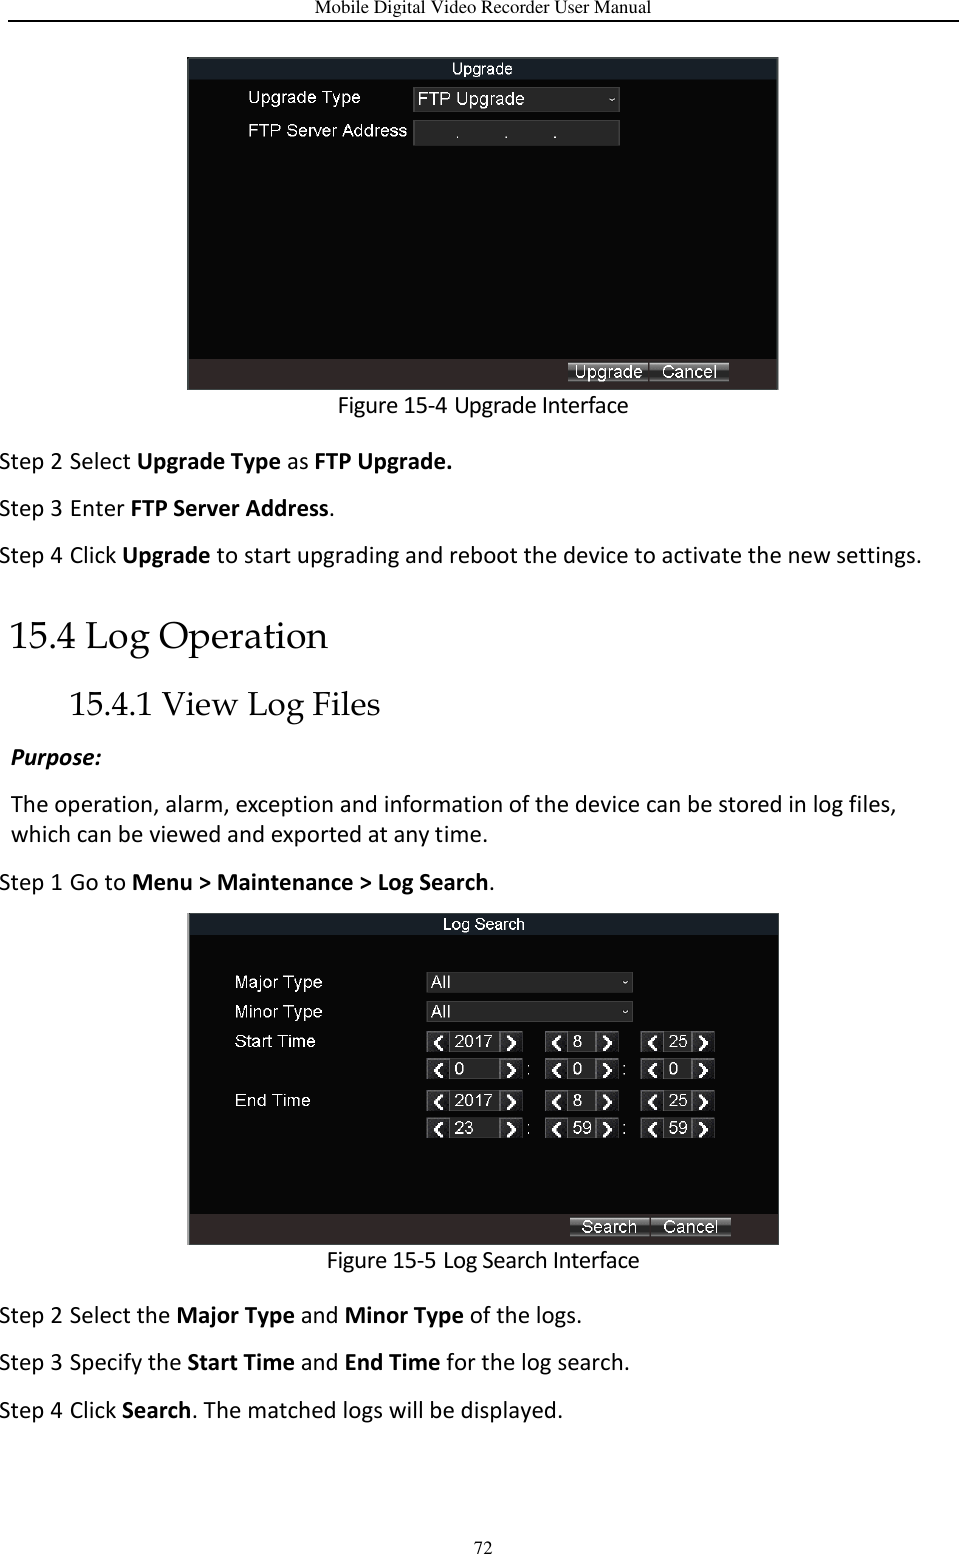 Mobile Digital Video Recorder User Manual 72  Figure 15-4 Upgrade Interface Step 2 Select Upgrade Type as FTP Upgrade. Step 3 Enter FTP Server Address. Step 4 Click Upgrade to start upgrading and reboot the device to activate the new settings. 15.4 Log Operation 15.4.1 View Log Files Purpose:   The operation, alarm, exception and information of the device can be stored in log files, which can be viewed and exported at any time. Step 1 Go to Menu &gt; Maintenance &gt; Log Search.  Figure 15-5 Log Search Interface Step 2 Select the Major Type and Minor Type of the logs. Step 3 Specify the Start Time and End Time for the log search. Step 4 Click Search. The matched logs will be displayed. 